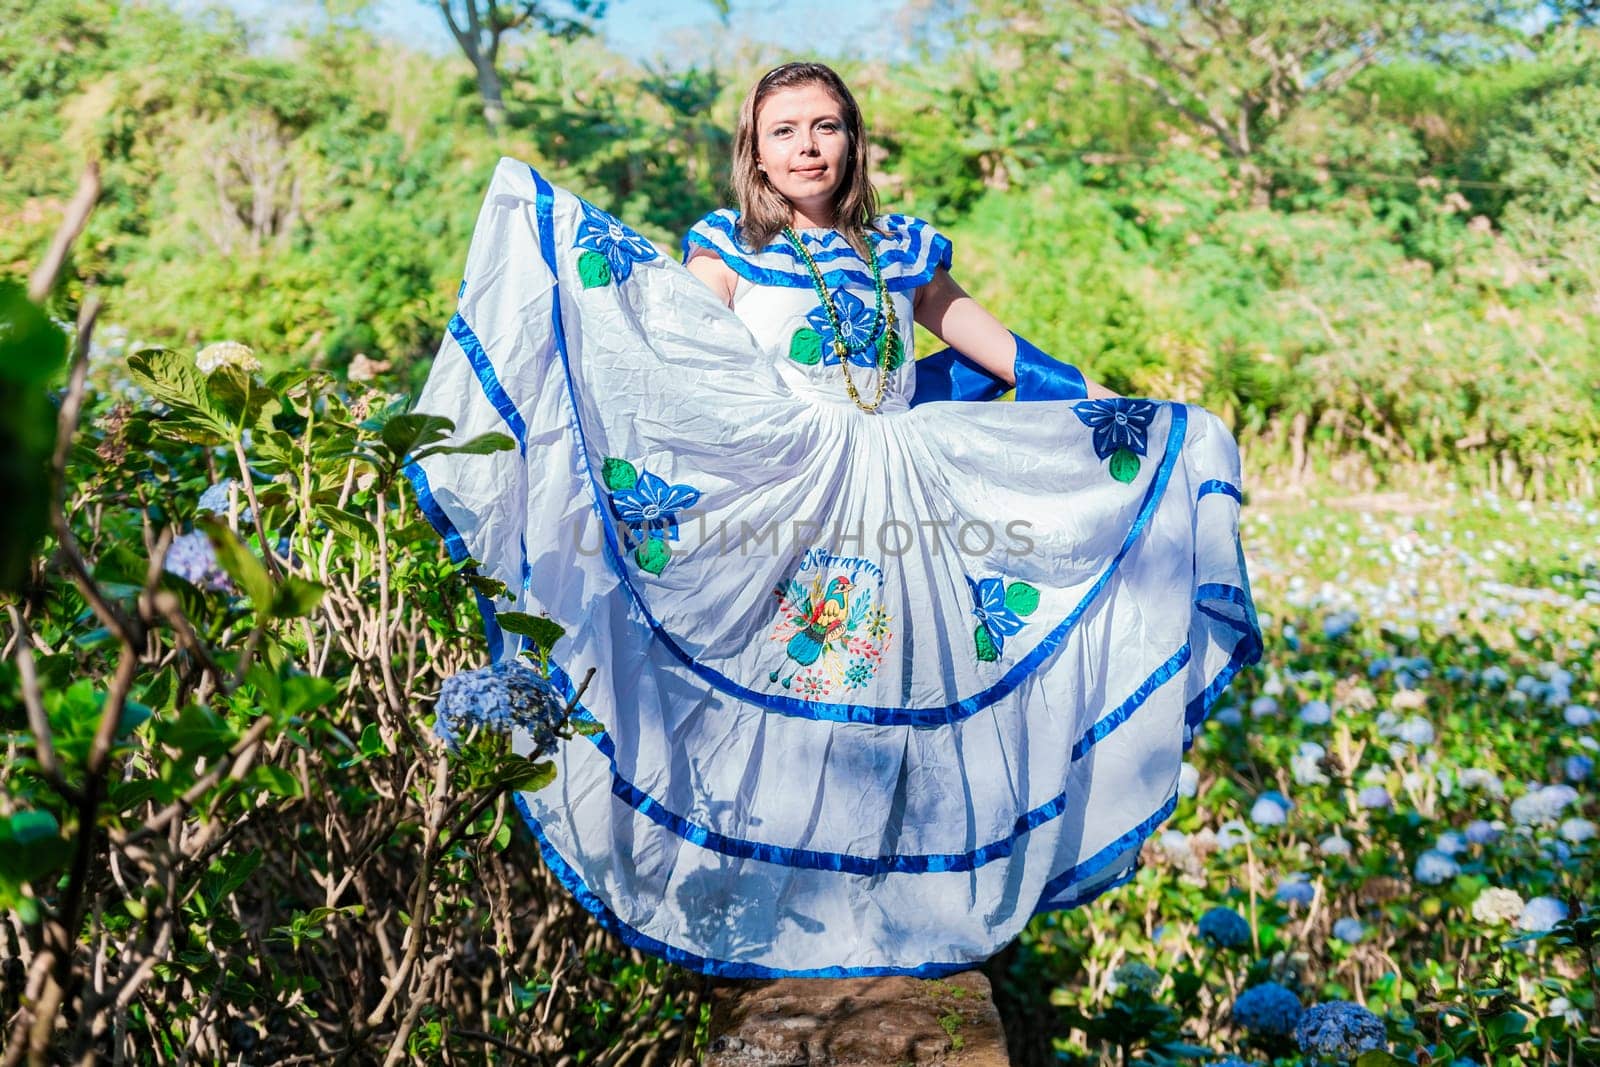 Nicaraguan woman in traditional folk costume in a field of Milflores, Smiling woman in national folk costume in a field surrounded by flowers. People in Nicaraguan national folk costume by isaiphoto